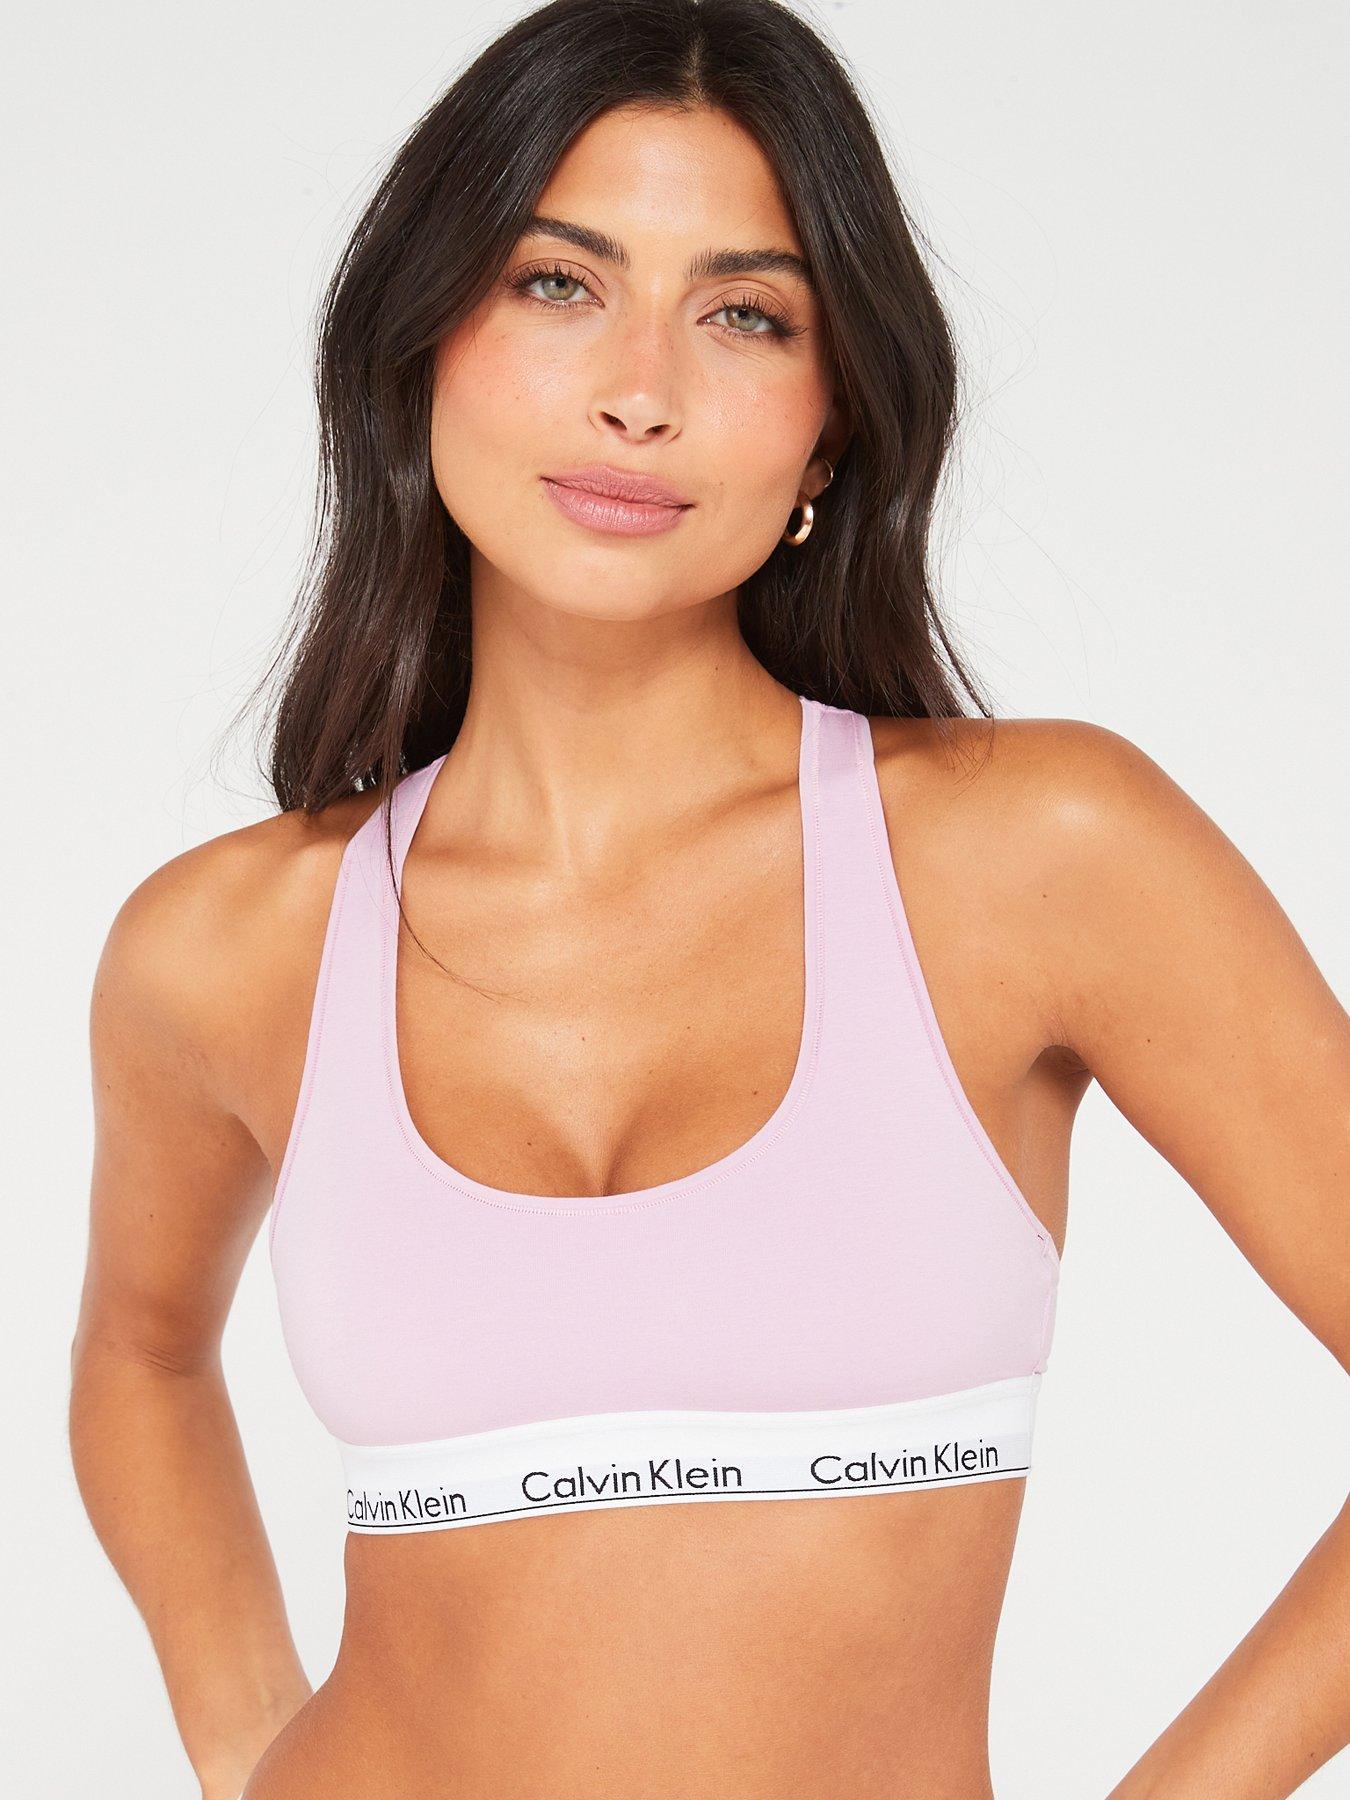 Calvin Klein Sports Bra with Criss Cross Back & Built in Push-Up - Size S